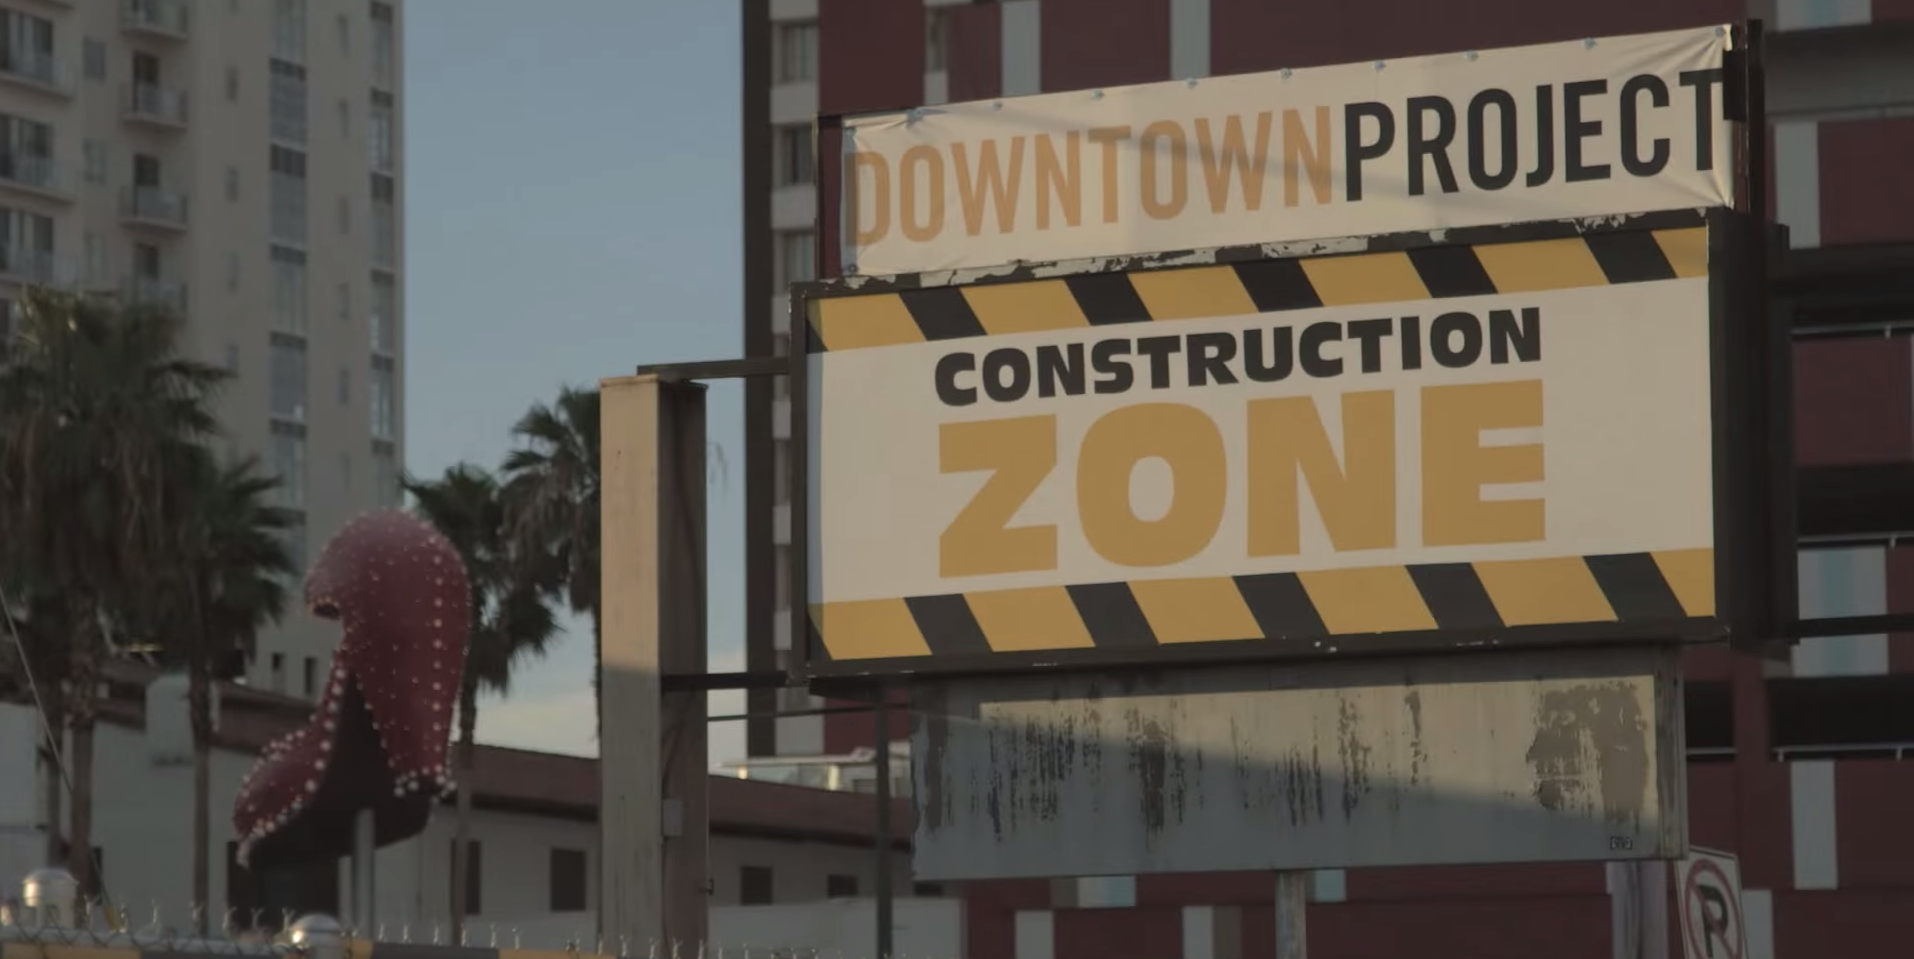 The Downtown Project. Image by: Morgan Spurlock / Tribeca / YouTube